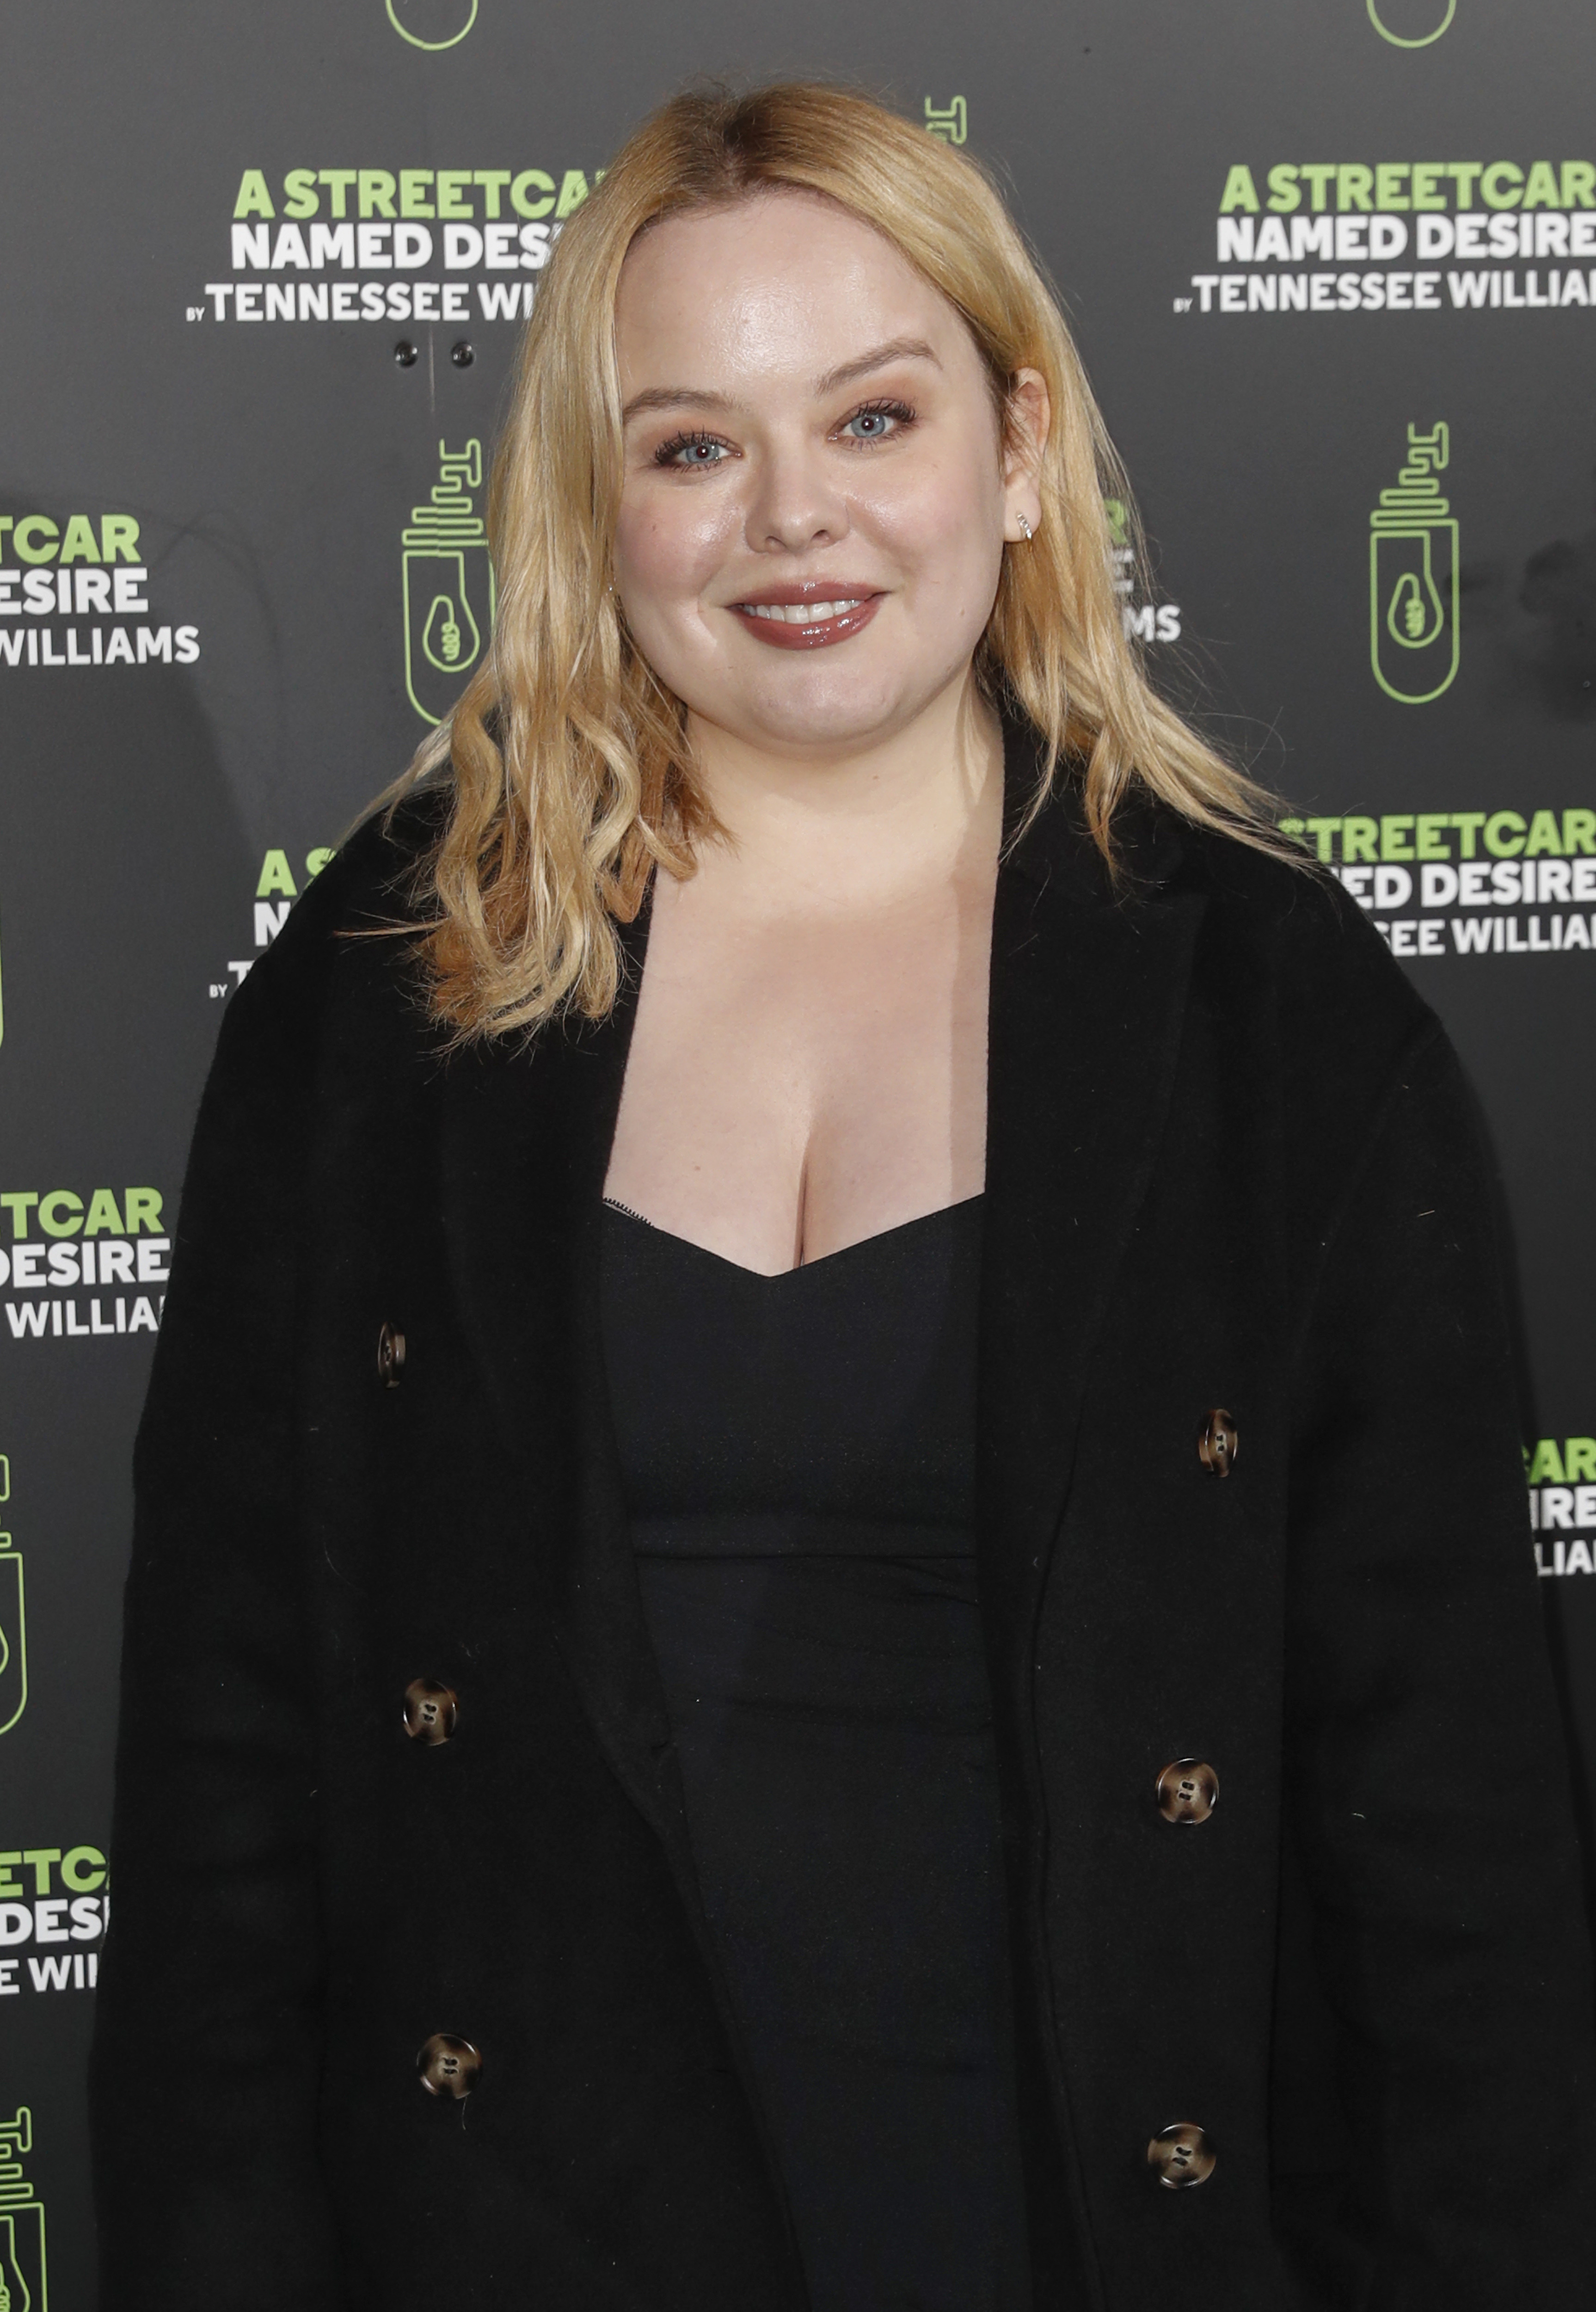 Nicola Coughlan poses at "A Streetcar Named Desire" West End Opening at the Phoenix Theatre on March 28, 2023, in London, England | Source: Getty Images